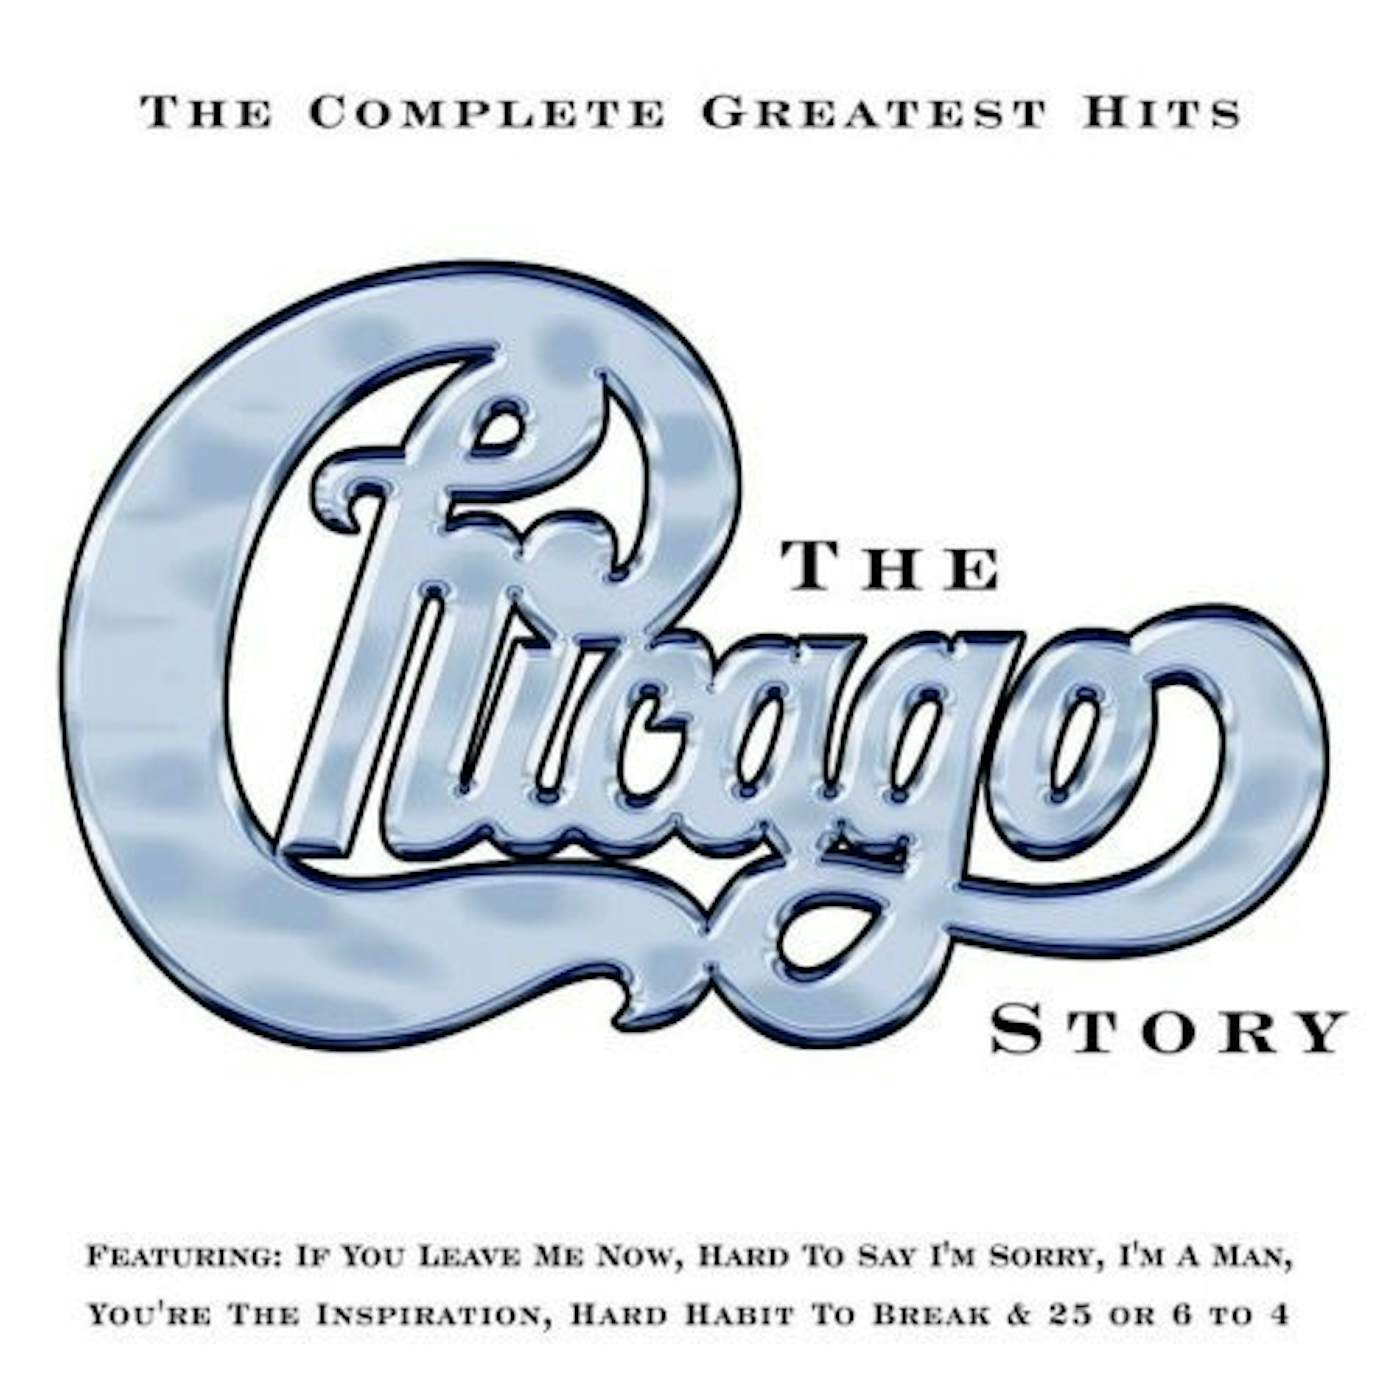 CHICAGO STORY: COMPLETE GREATEST CD